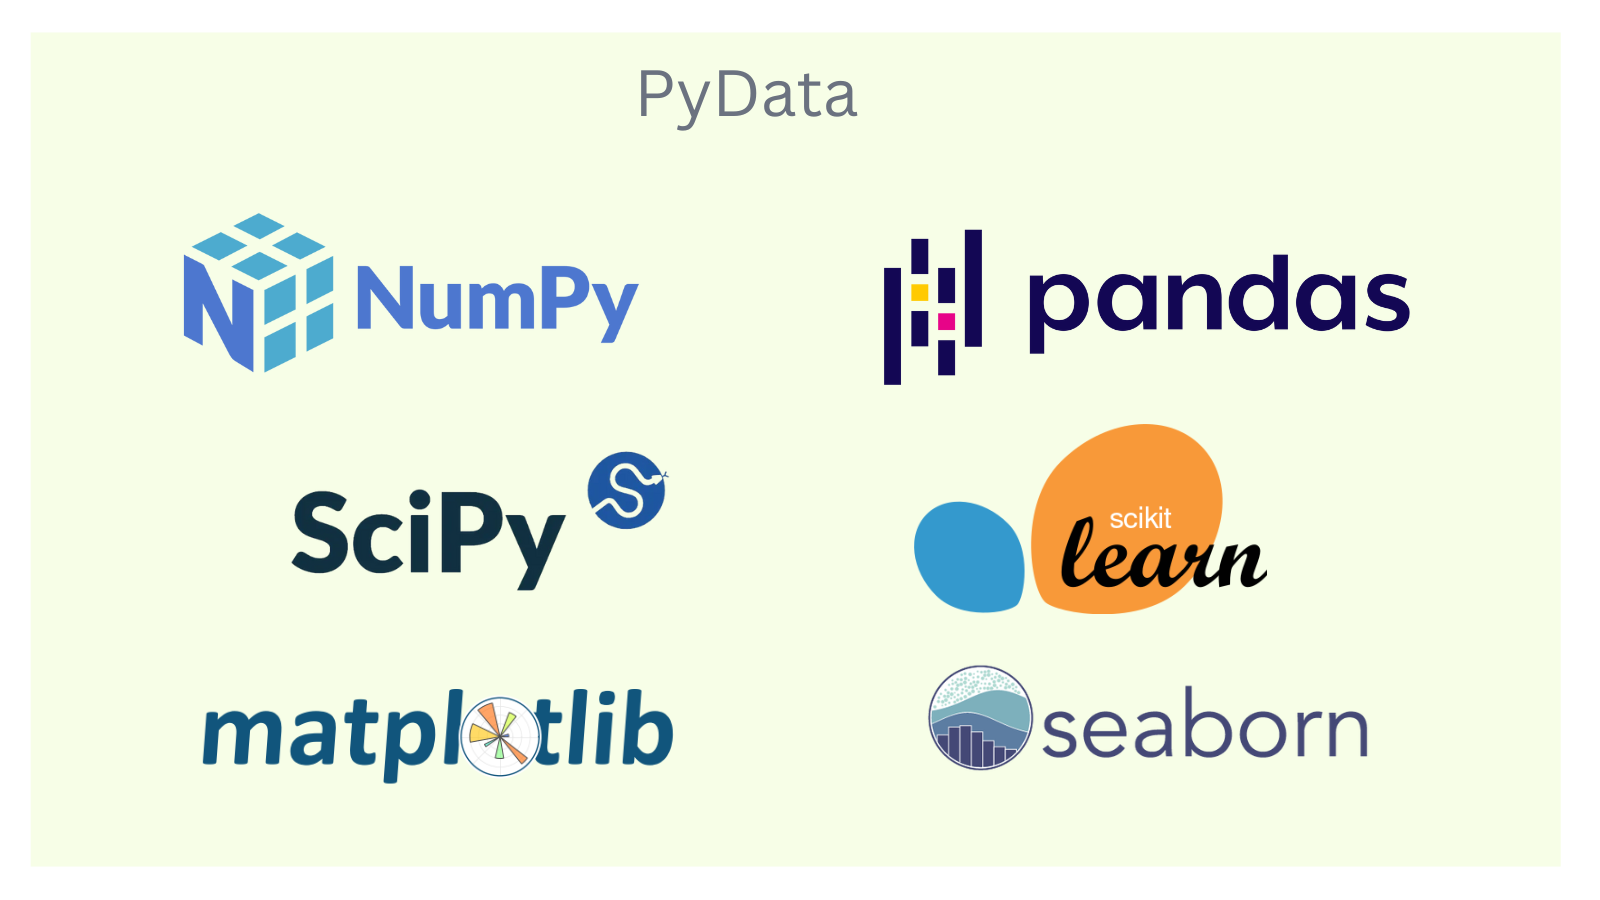 PyData packages